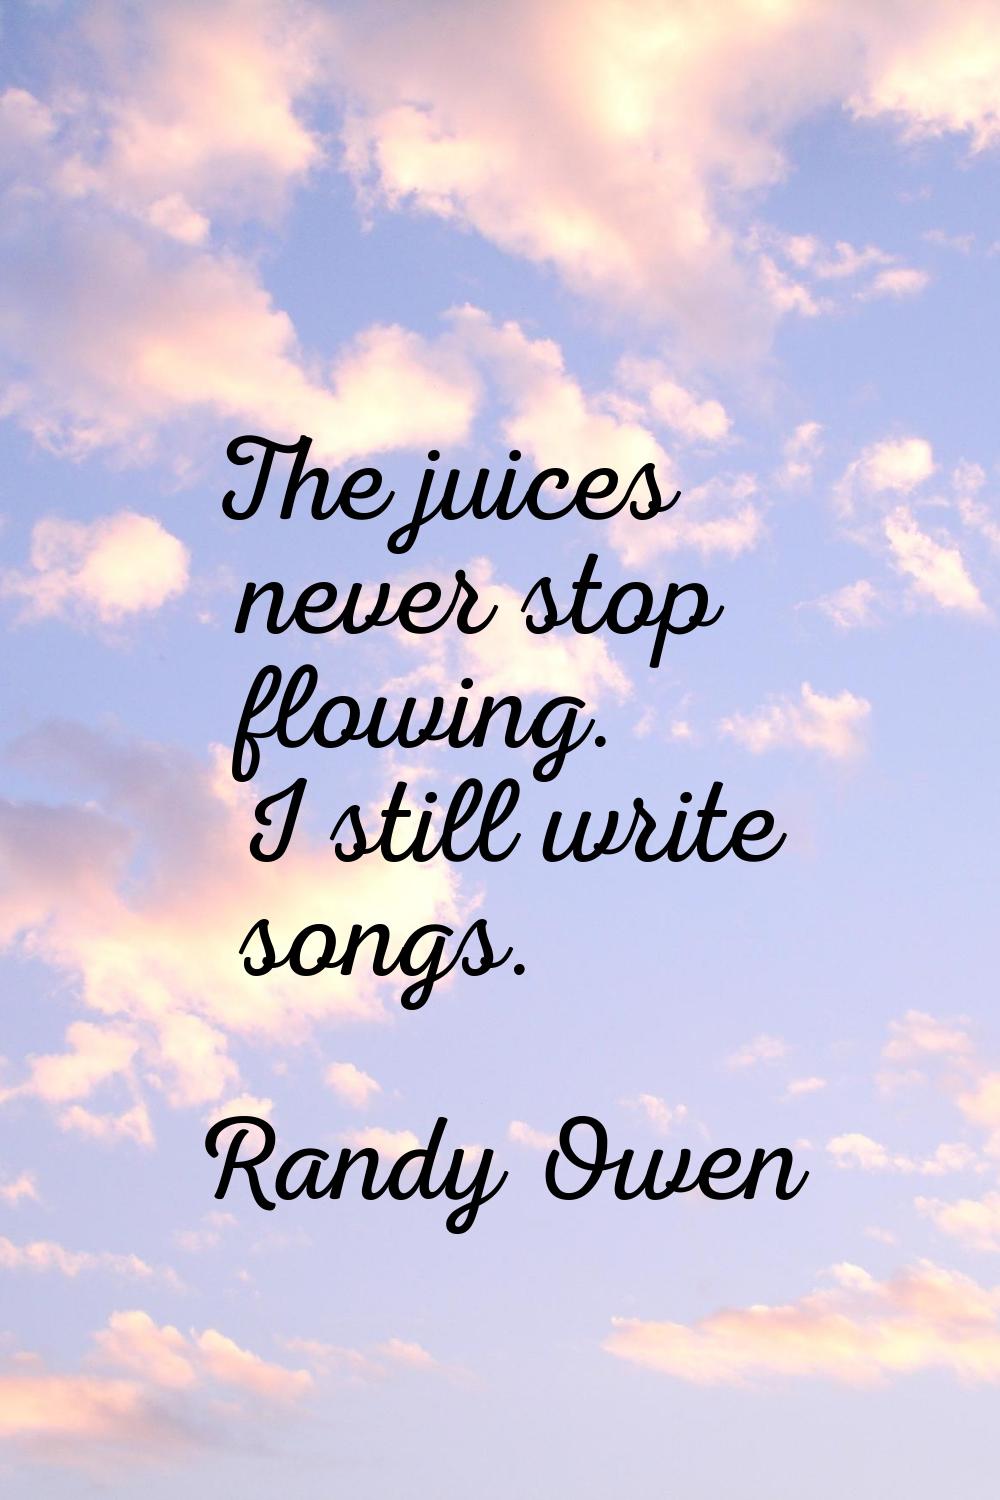 The juices never stop flowing. I still write songs.